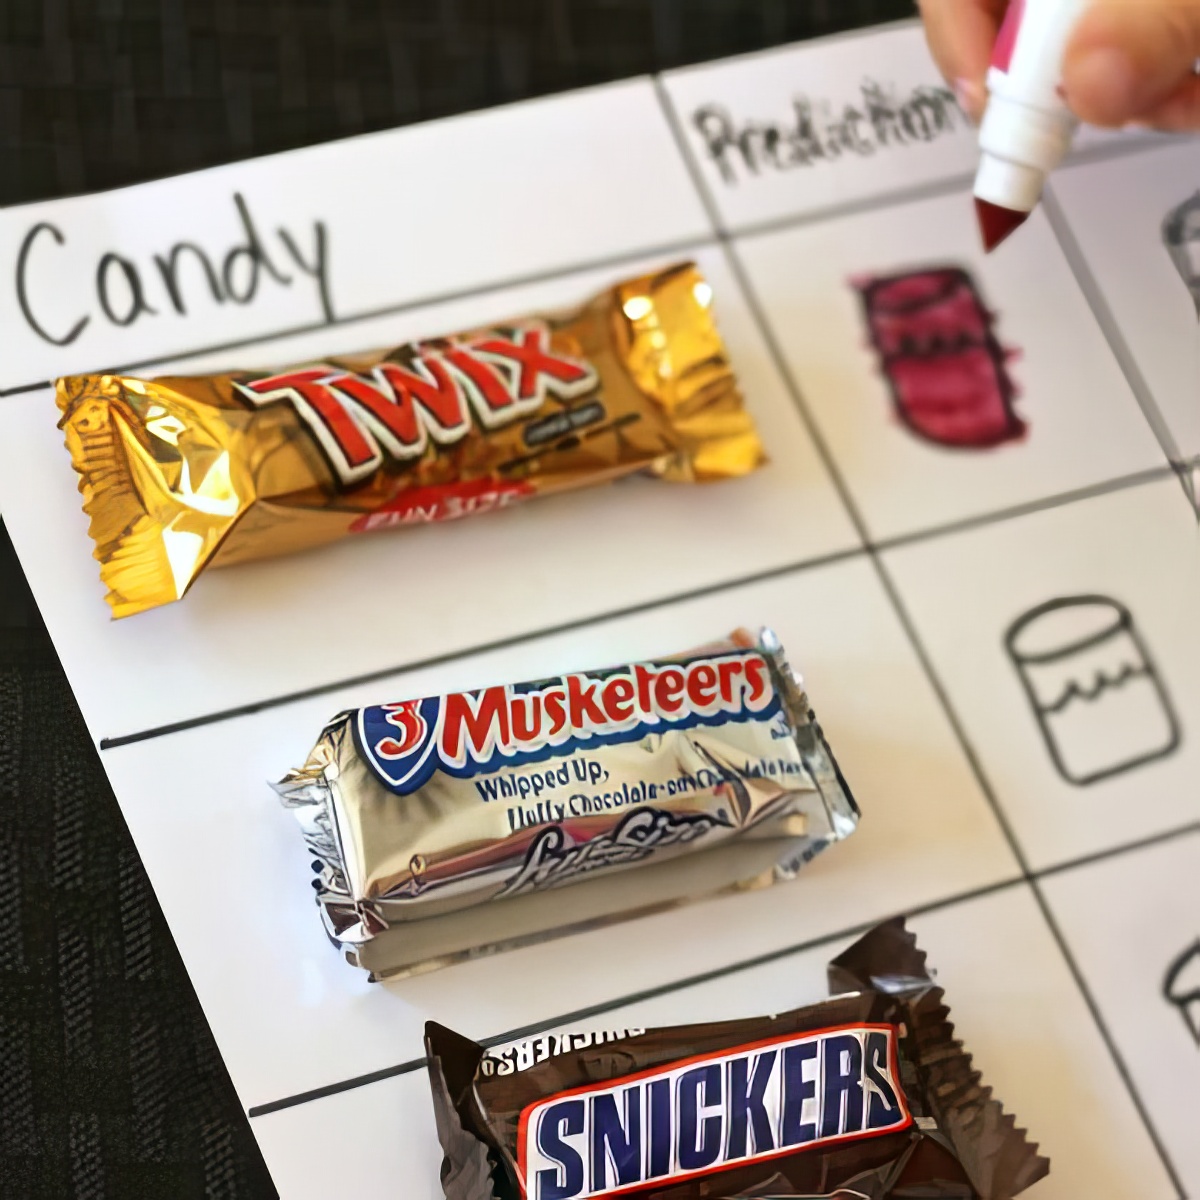 Which do you think will float or sink on this super awesome and fun candy bar experiment!